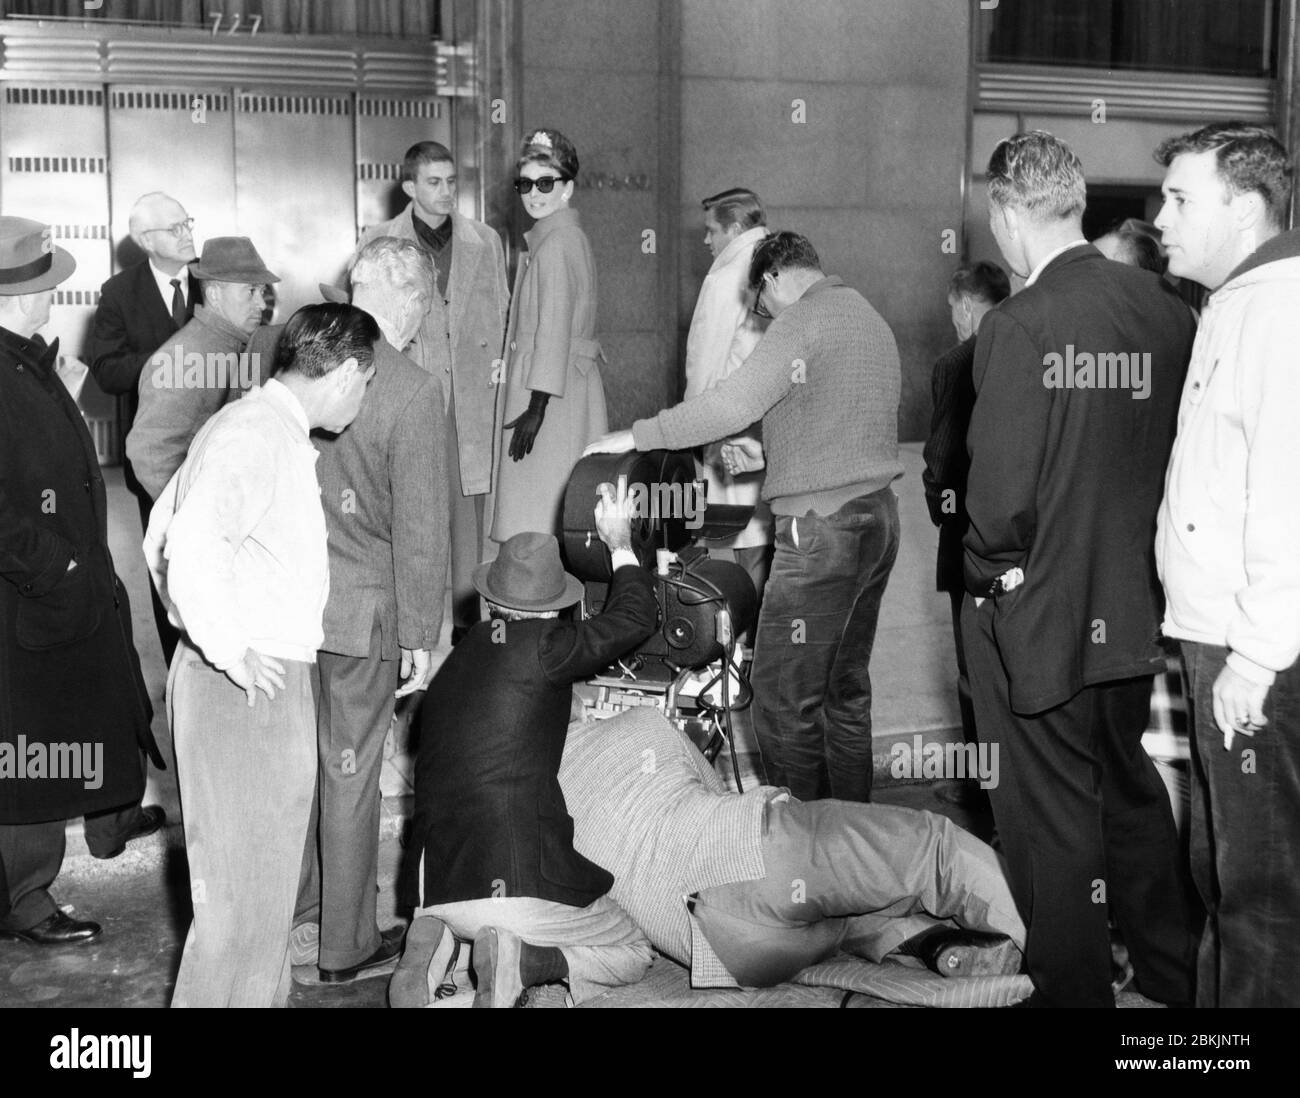 Director BLAKE EDWARDS AUDREY HEPBURN and GEORGE PEPPARD with Movie Crew on set location candid filming outside Tiffany and Co. in Manhattan New York City for BREAKFAST AT TIFFANY'S 1961 gown Hubert de Givenchy novel Truman Capote Jurow-Shepherd / Paramount Pictures Stock Photo